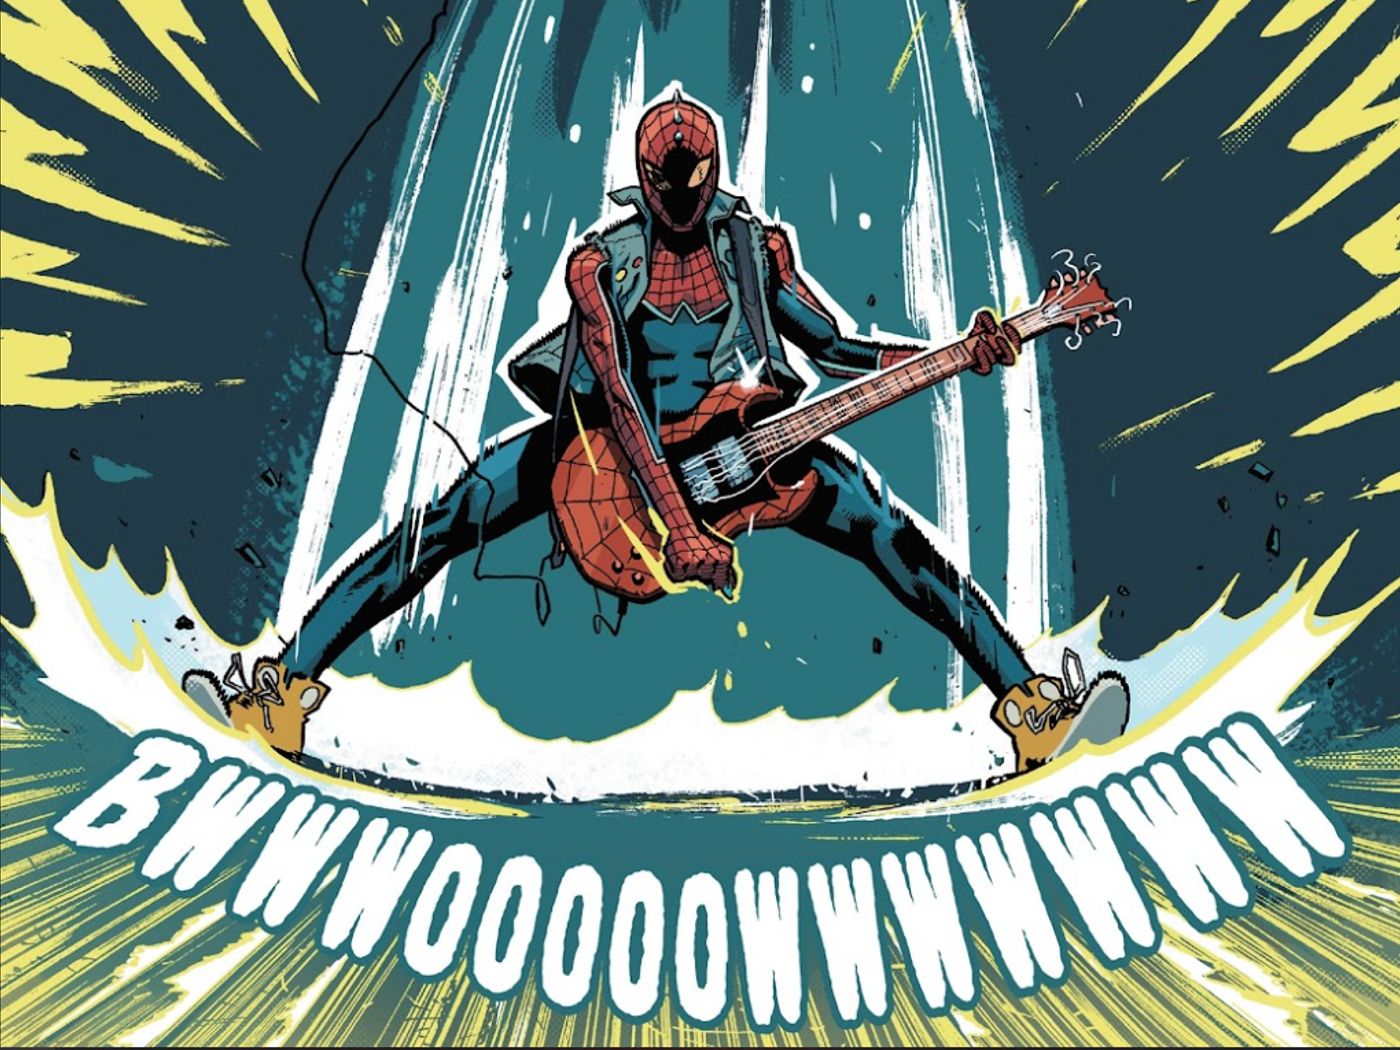 Spider-Punk unleashing a lethal blast from his guitar.